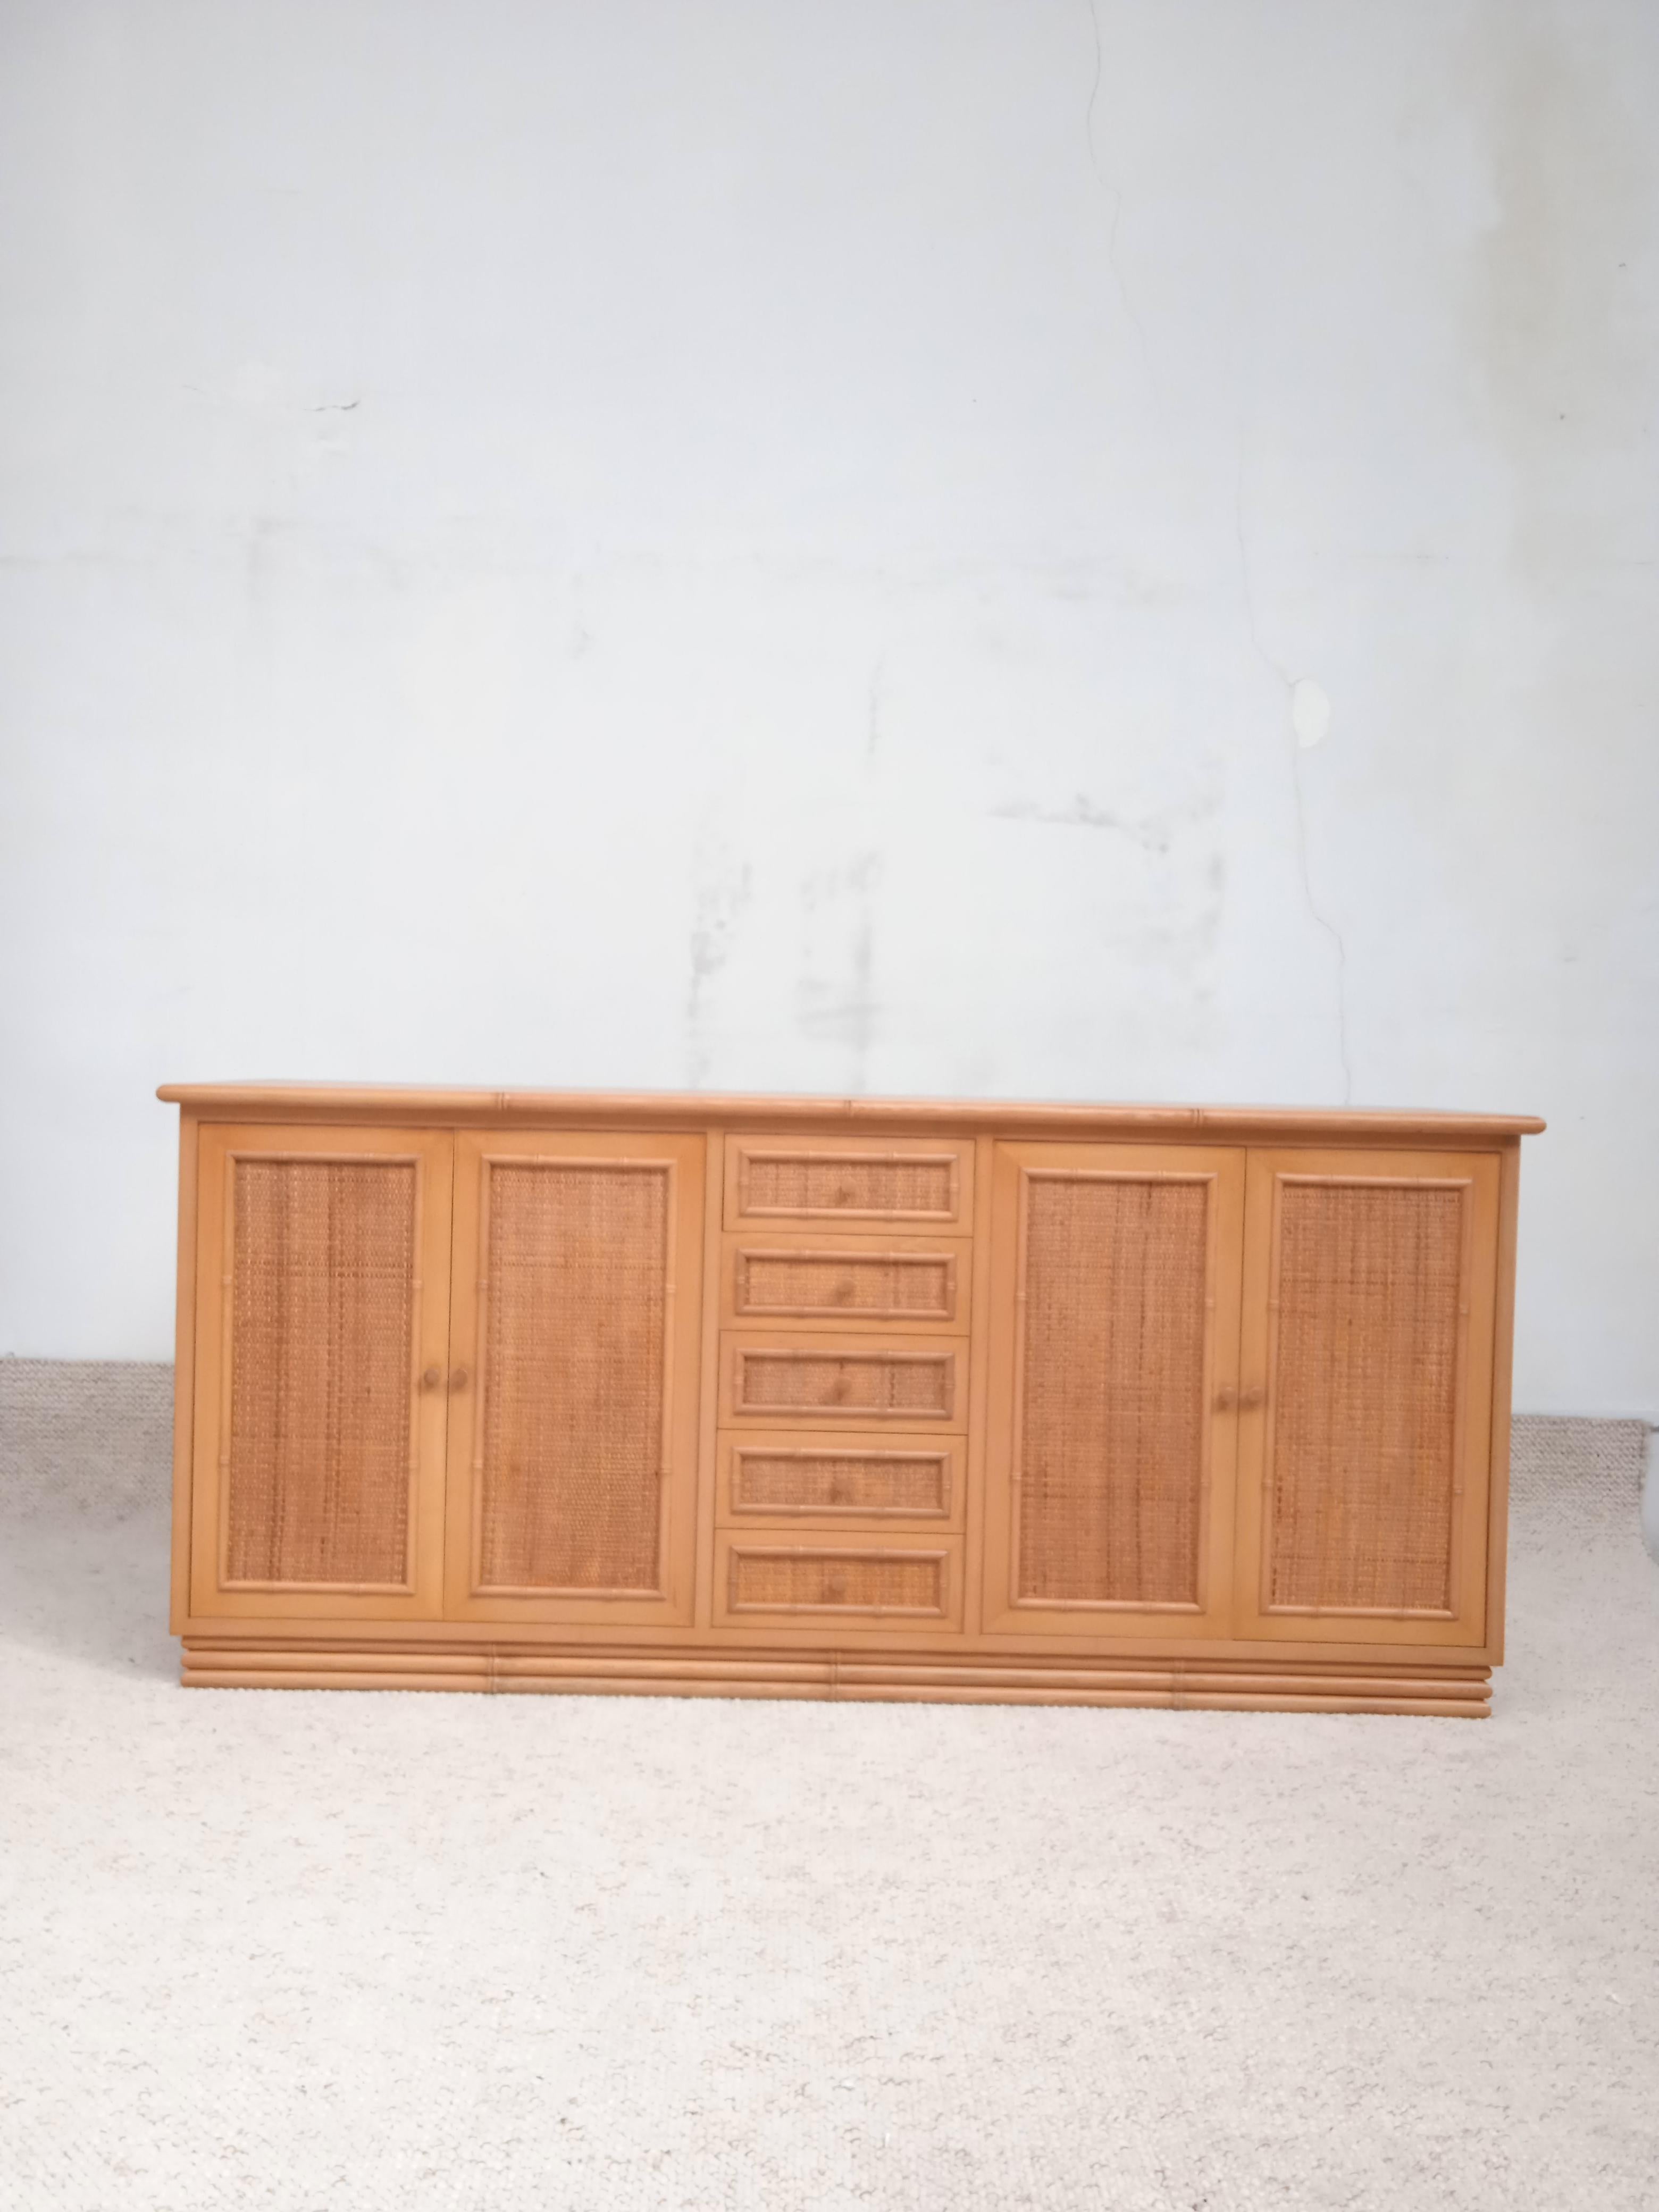 Bamboo style sideboard with rattan details 1970. In solid wood, atributed to Giorgetti. 
This sideboard features a sturdy bamboo style frame. It shows rattan panels on drawers and doors. Despite slight traces of use, the wood is in good condition